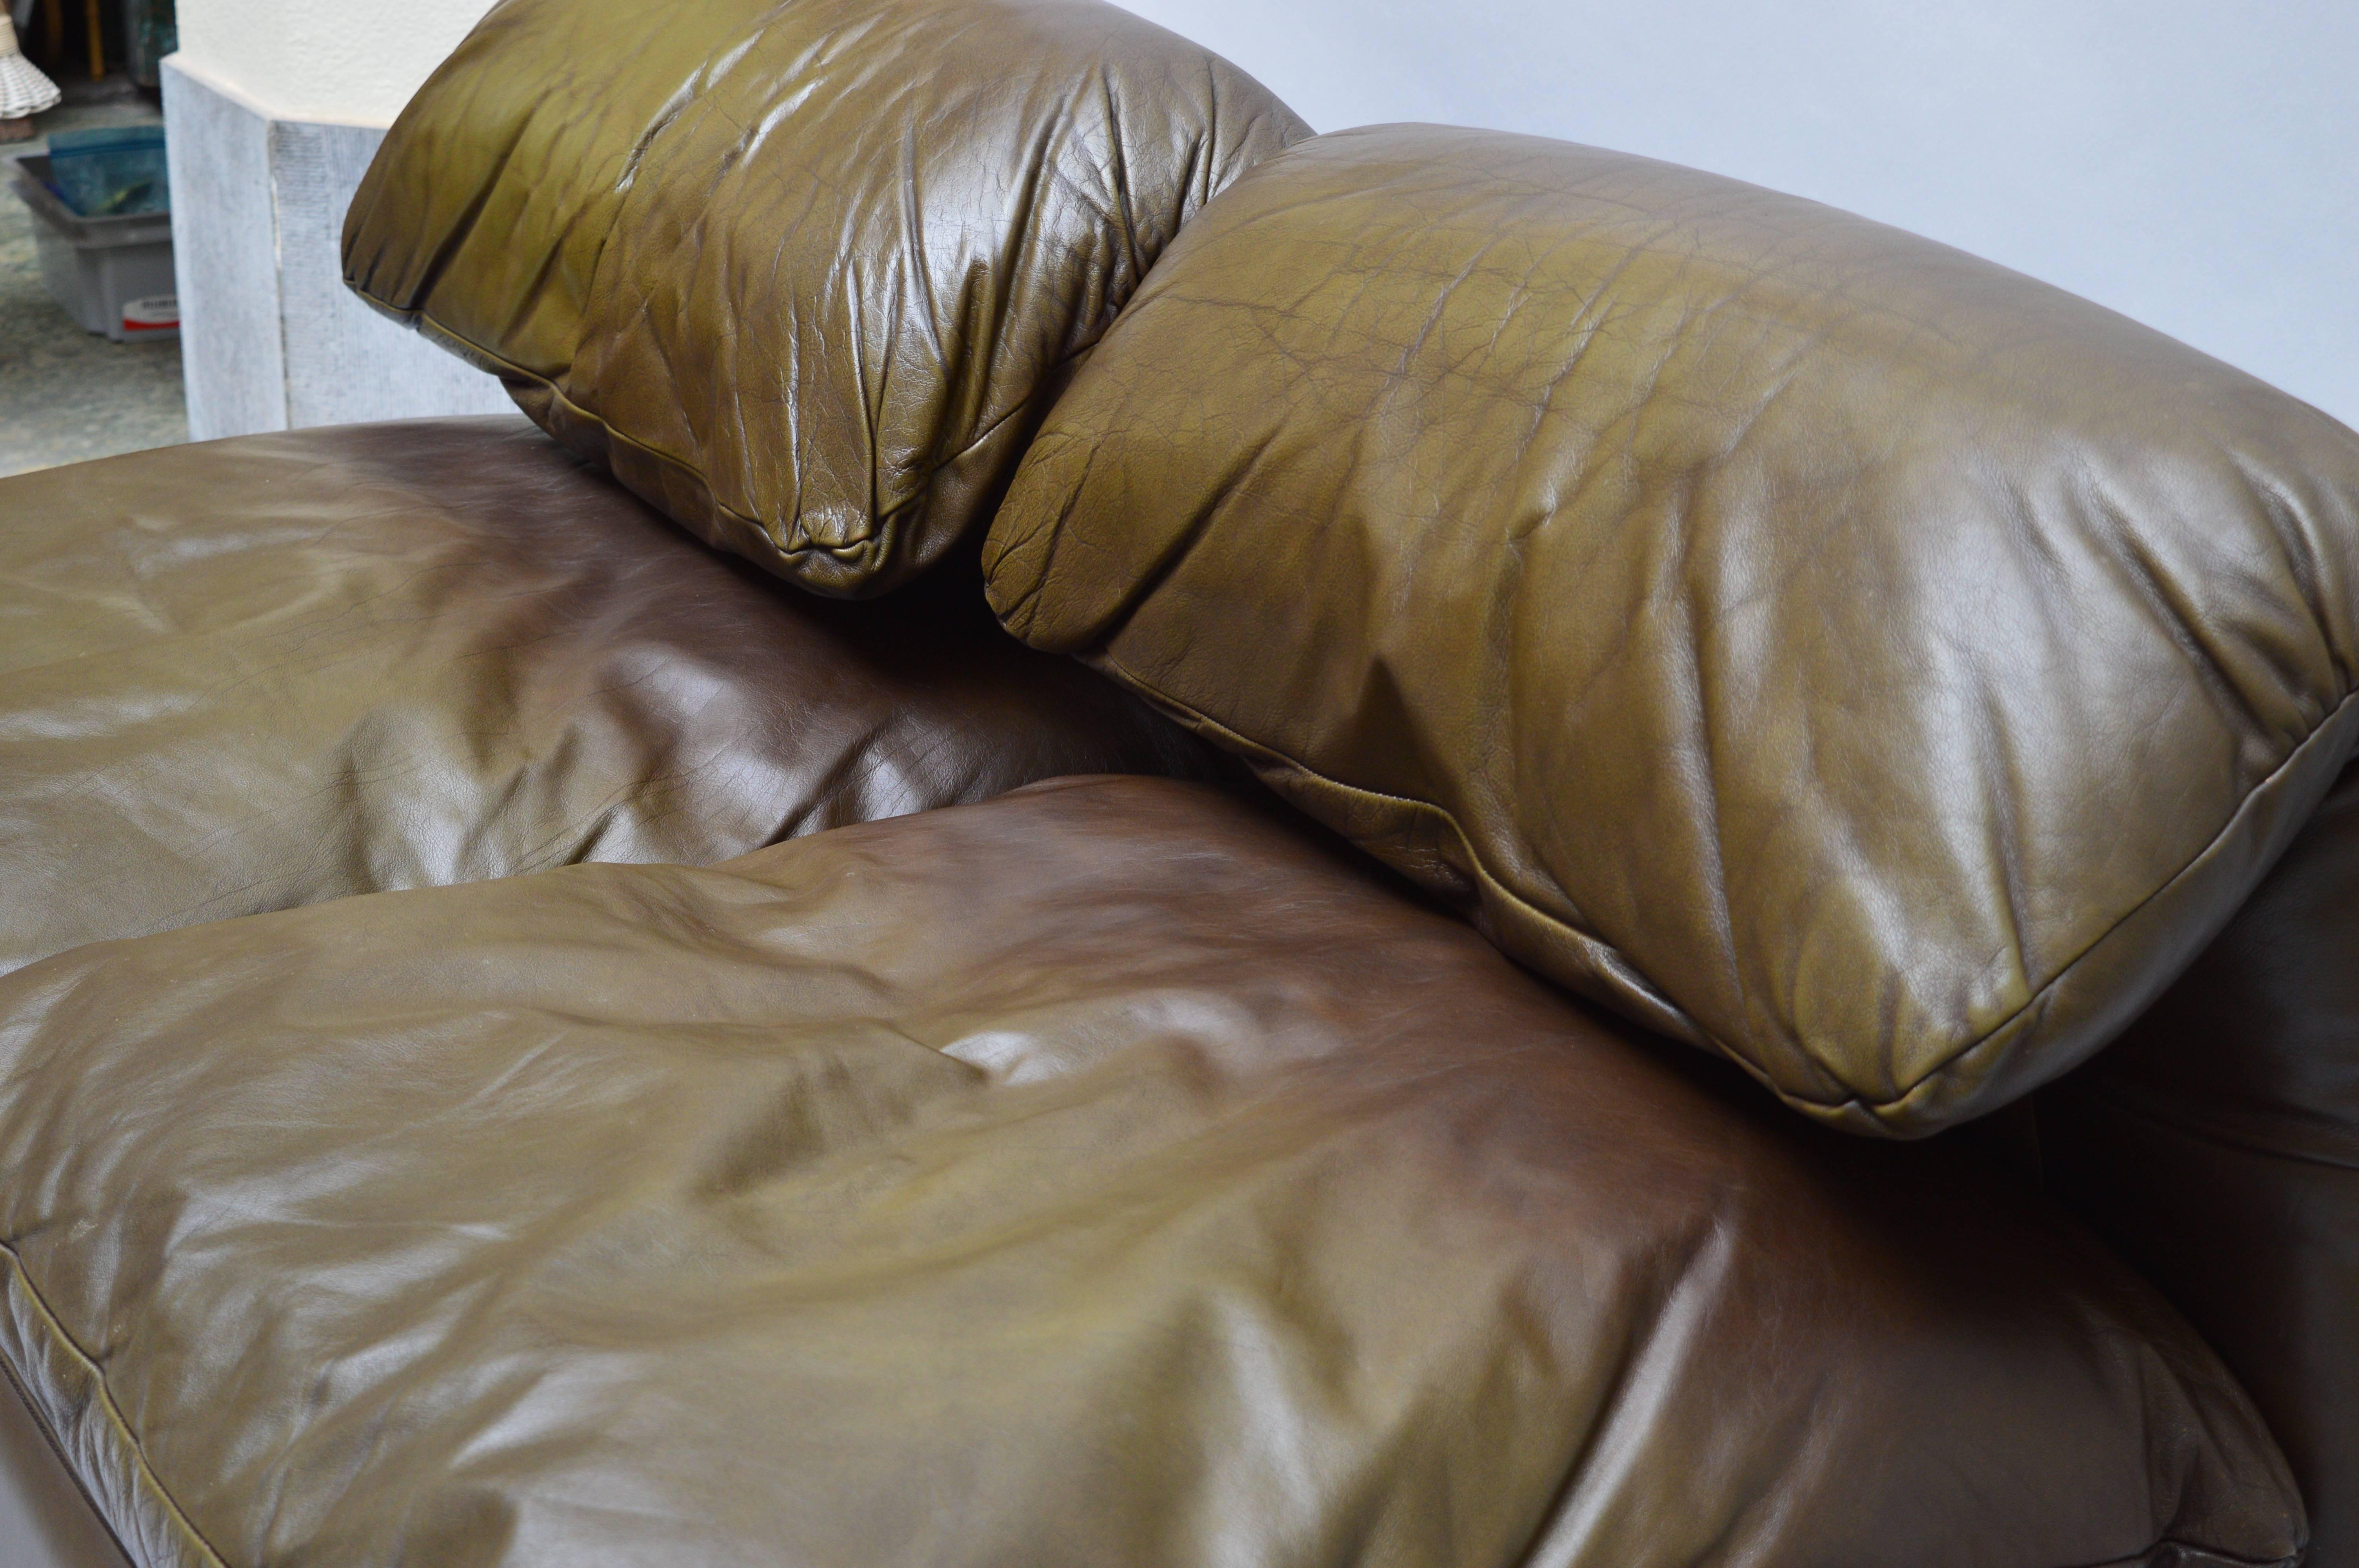 Roche Bobois leather two-seat sofa in very good condition.
The cushions are down filled and the leather is thick and flexible with no signs of drying or cracking. The original chocolate brown color has mostly faded to a more milk chocolate